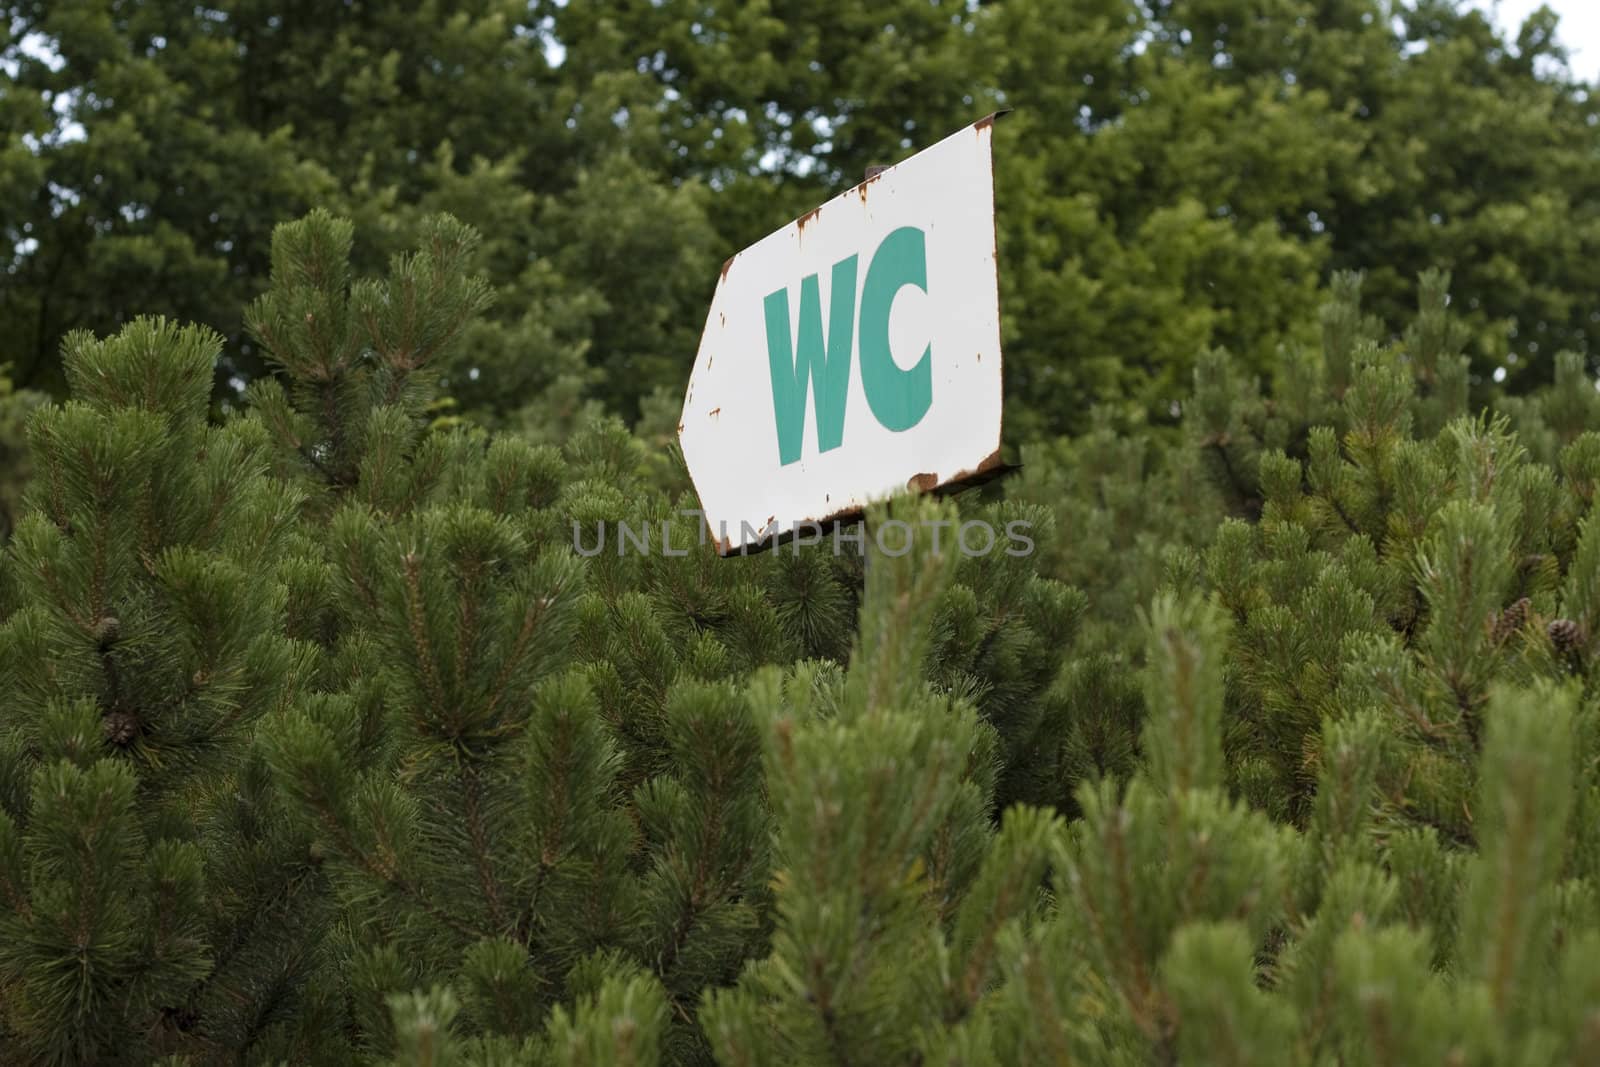 arrow sign showing WC direction